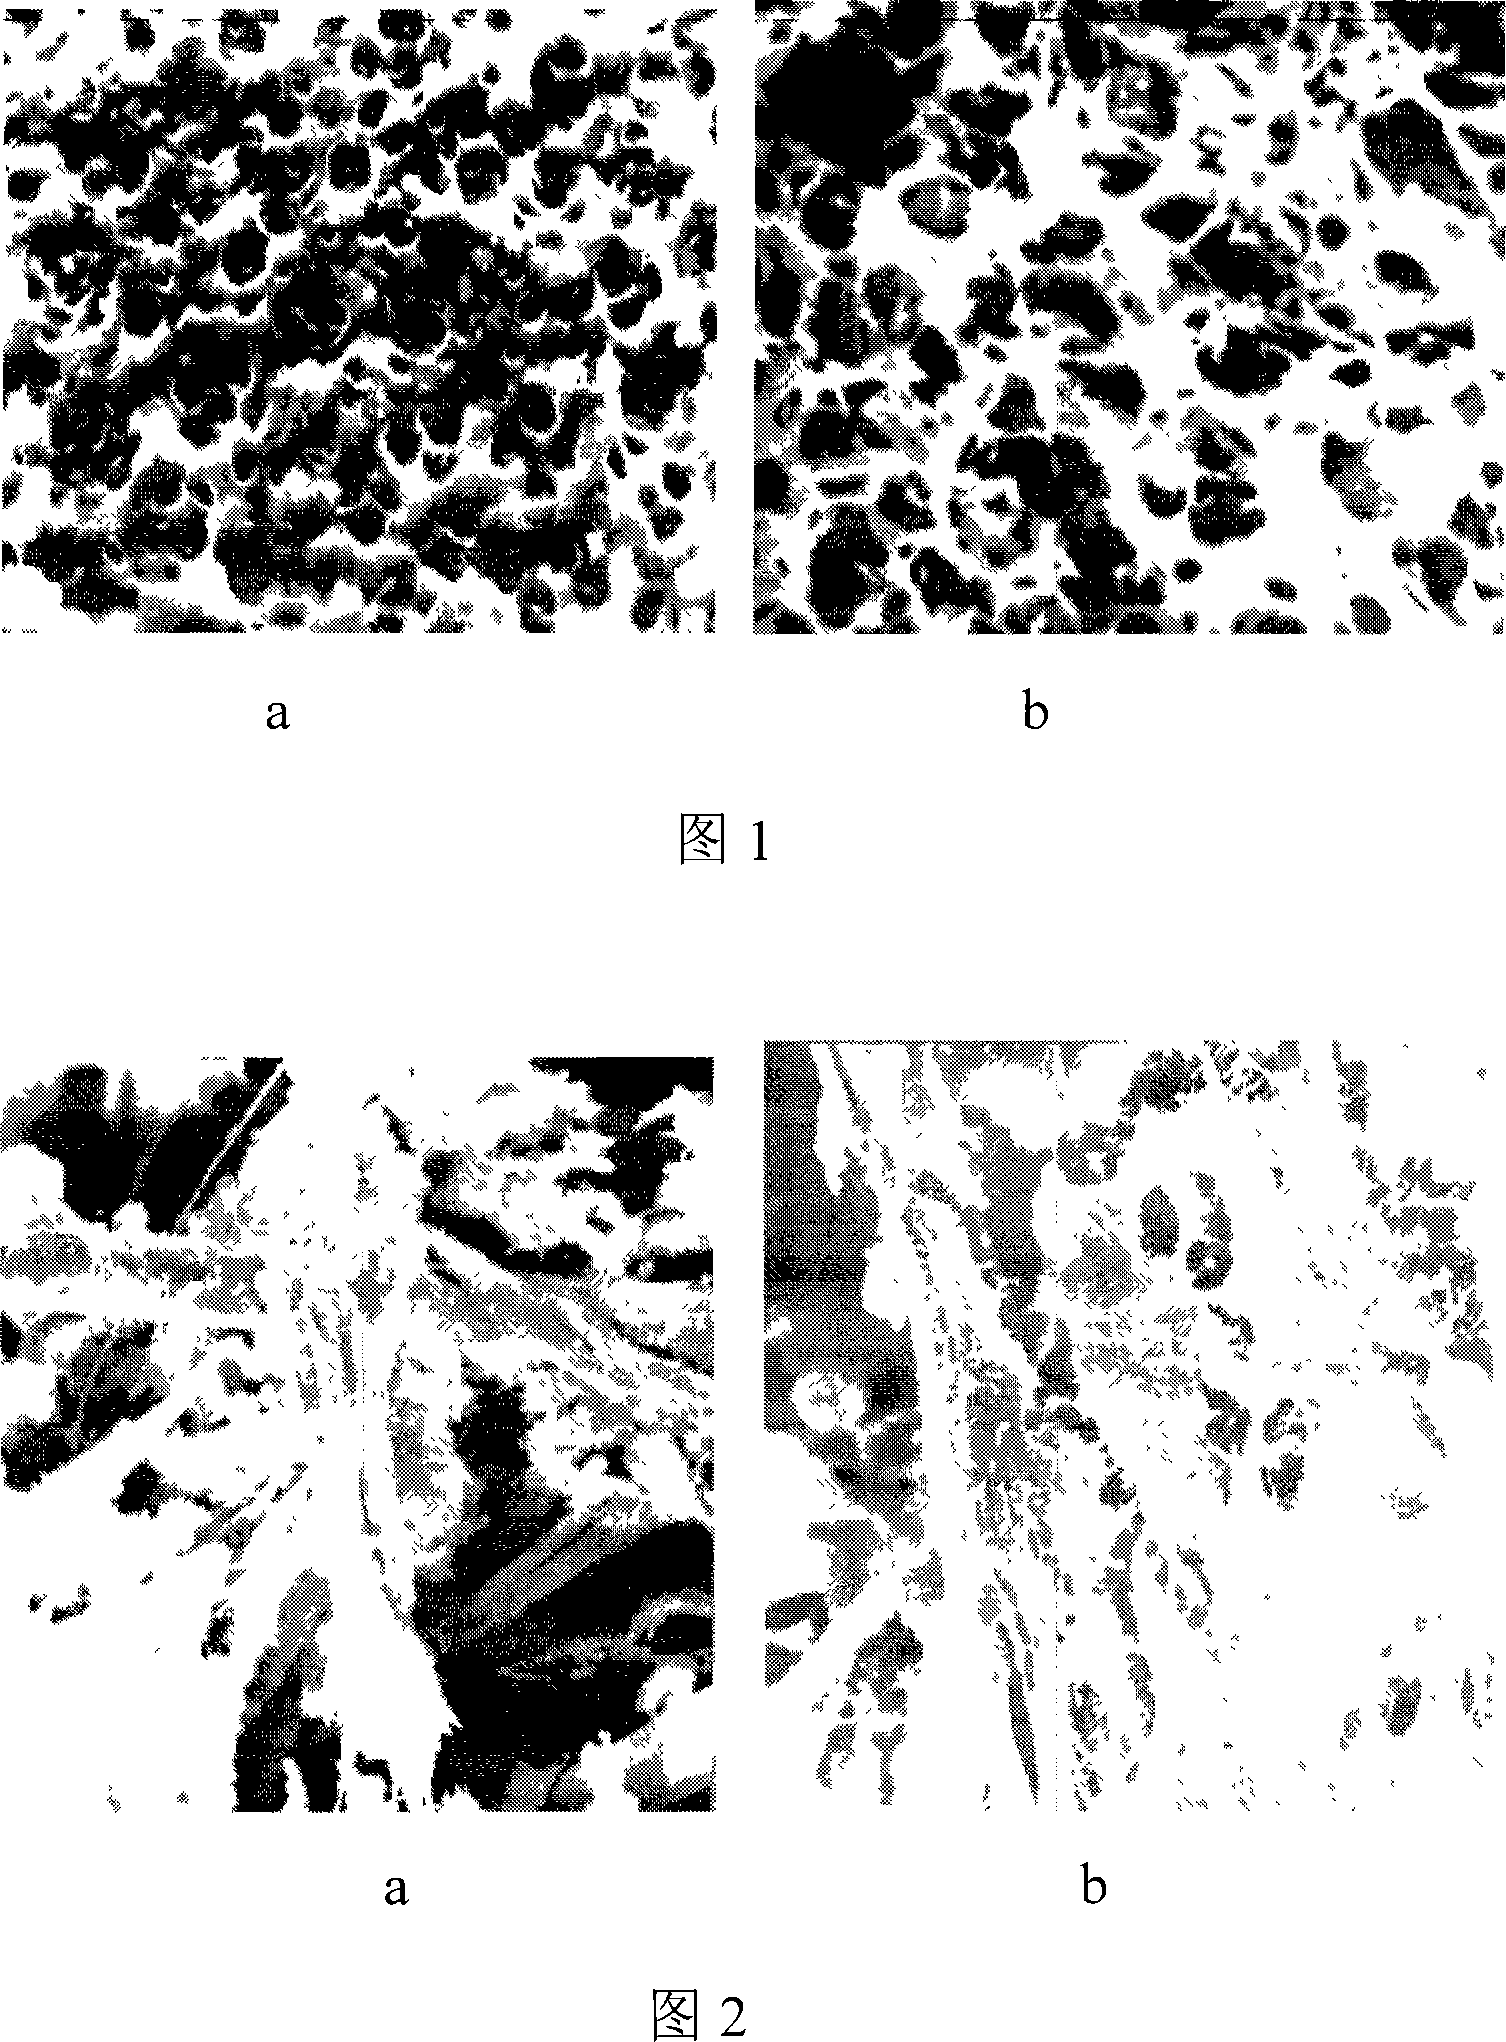 Preparation of medical bioavailability bracket material and uses thereof